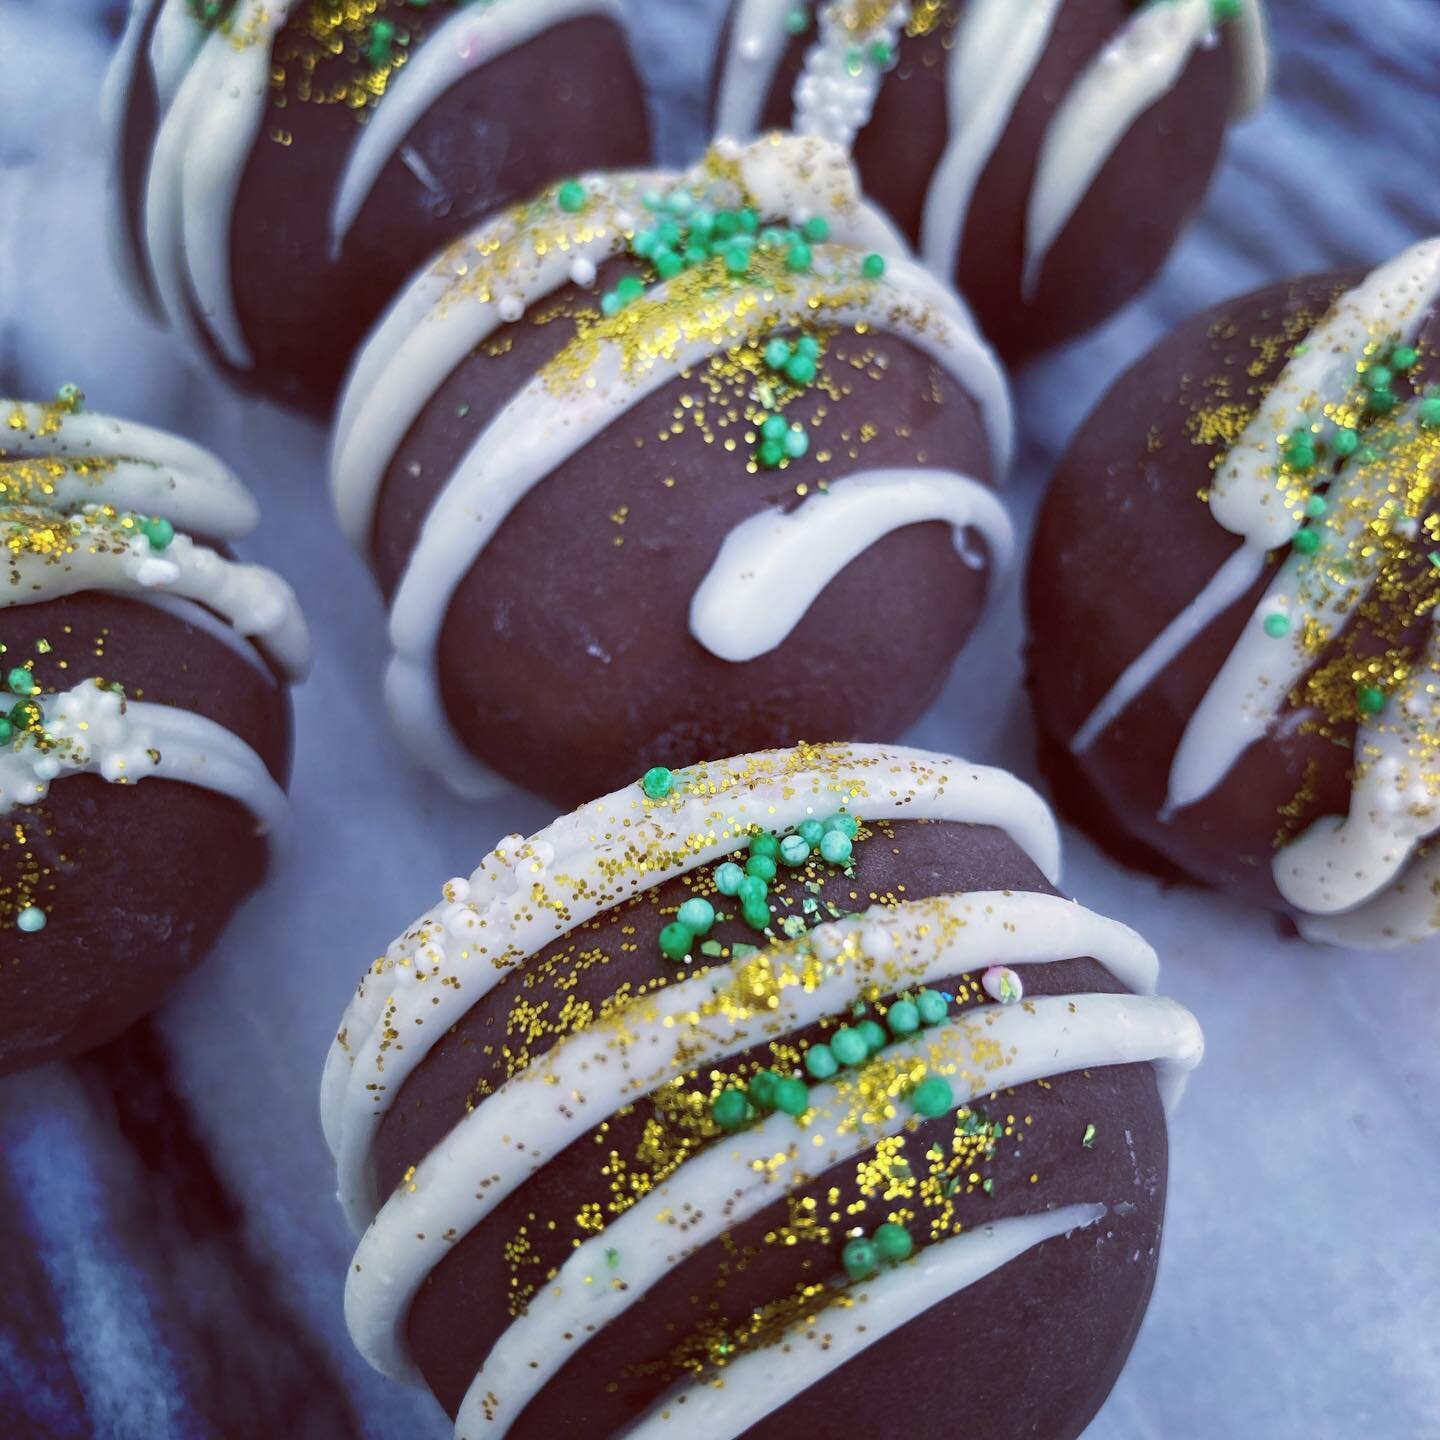 Order your St. Paddy&rsquo;s sweets for Wed 3/16 &amp; Thurs 3/17 doorstep delivery within our Southern MA local service area!✨☘️🌈💰☘️✨
.
.
To order, click the link in our bio OR go to https://www.danisheavenlybakeshop.com/2022-st-patricks-day-menu
